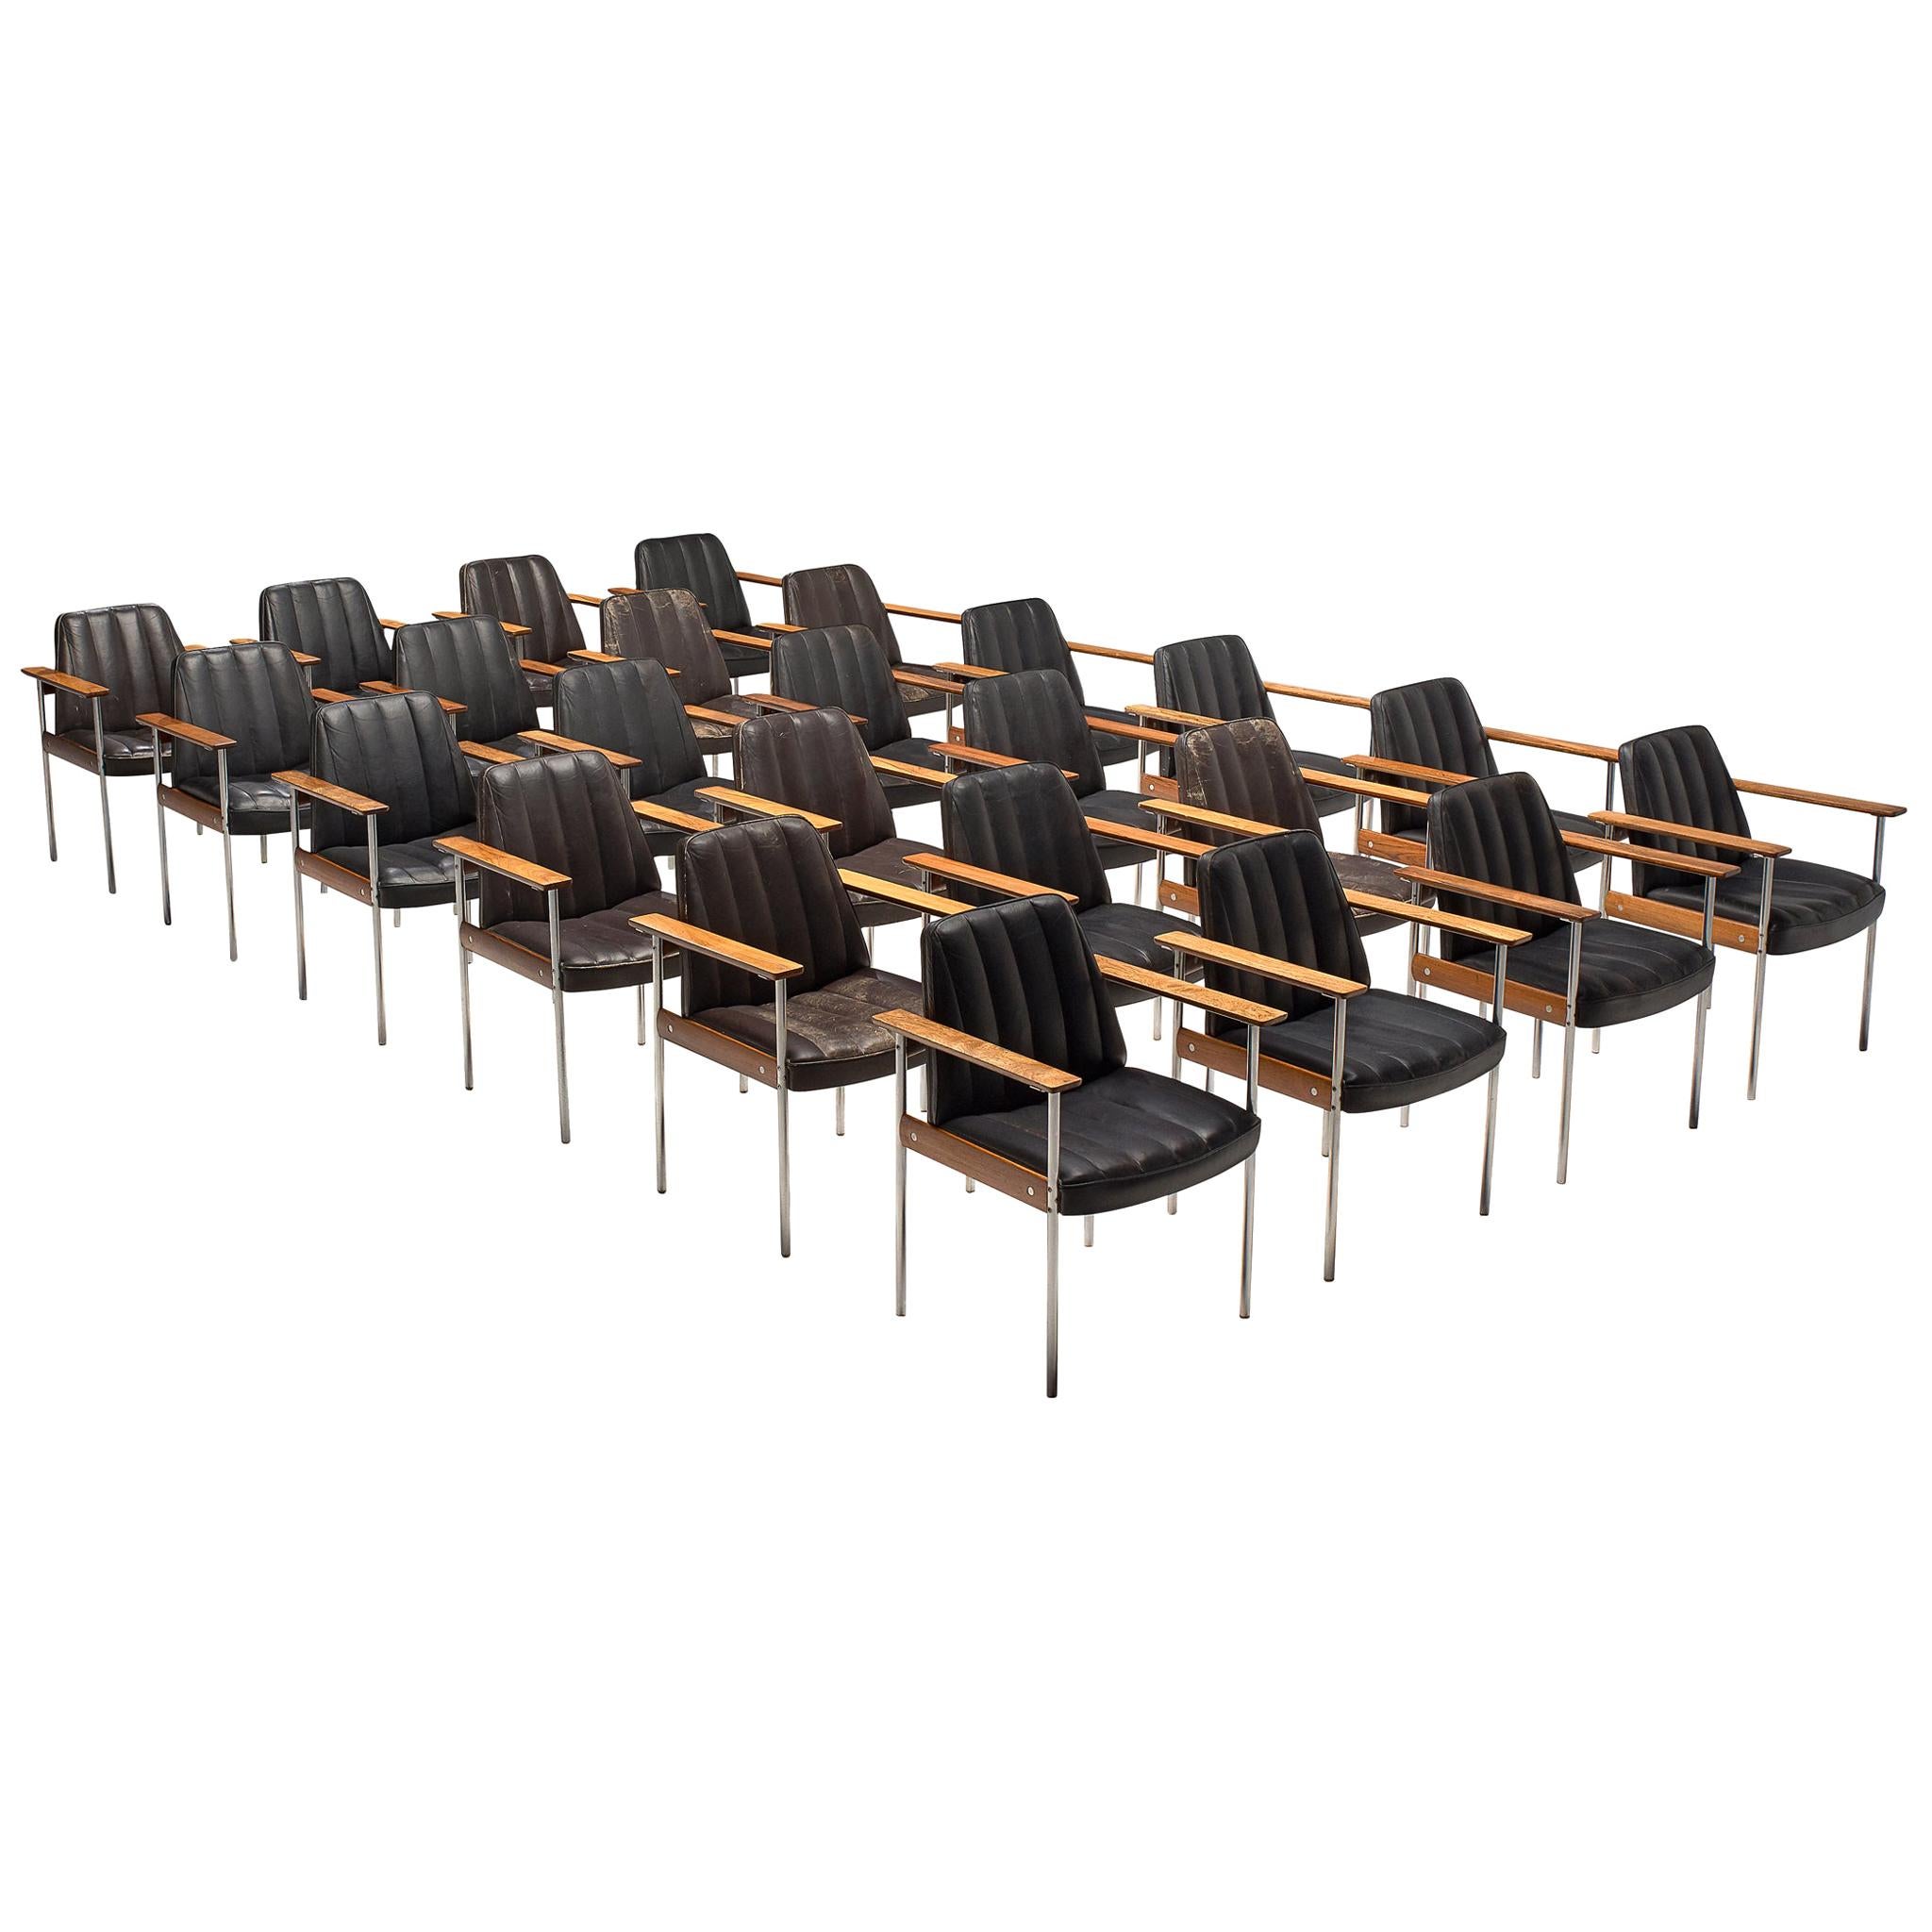 Large Set of 24 Chairs in Rosewood by Sven Ivar Dysthe